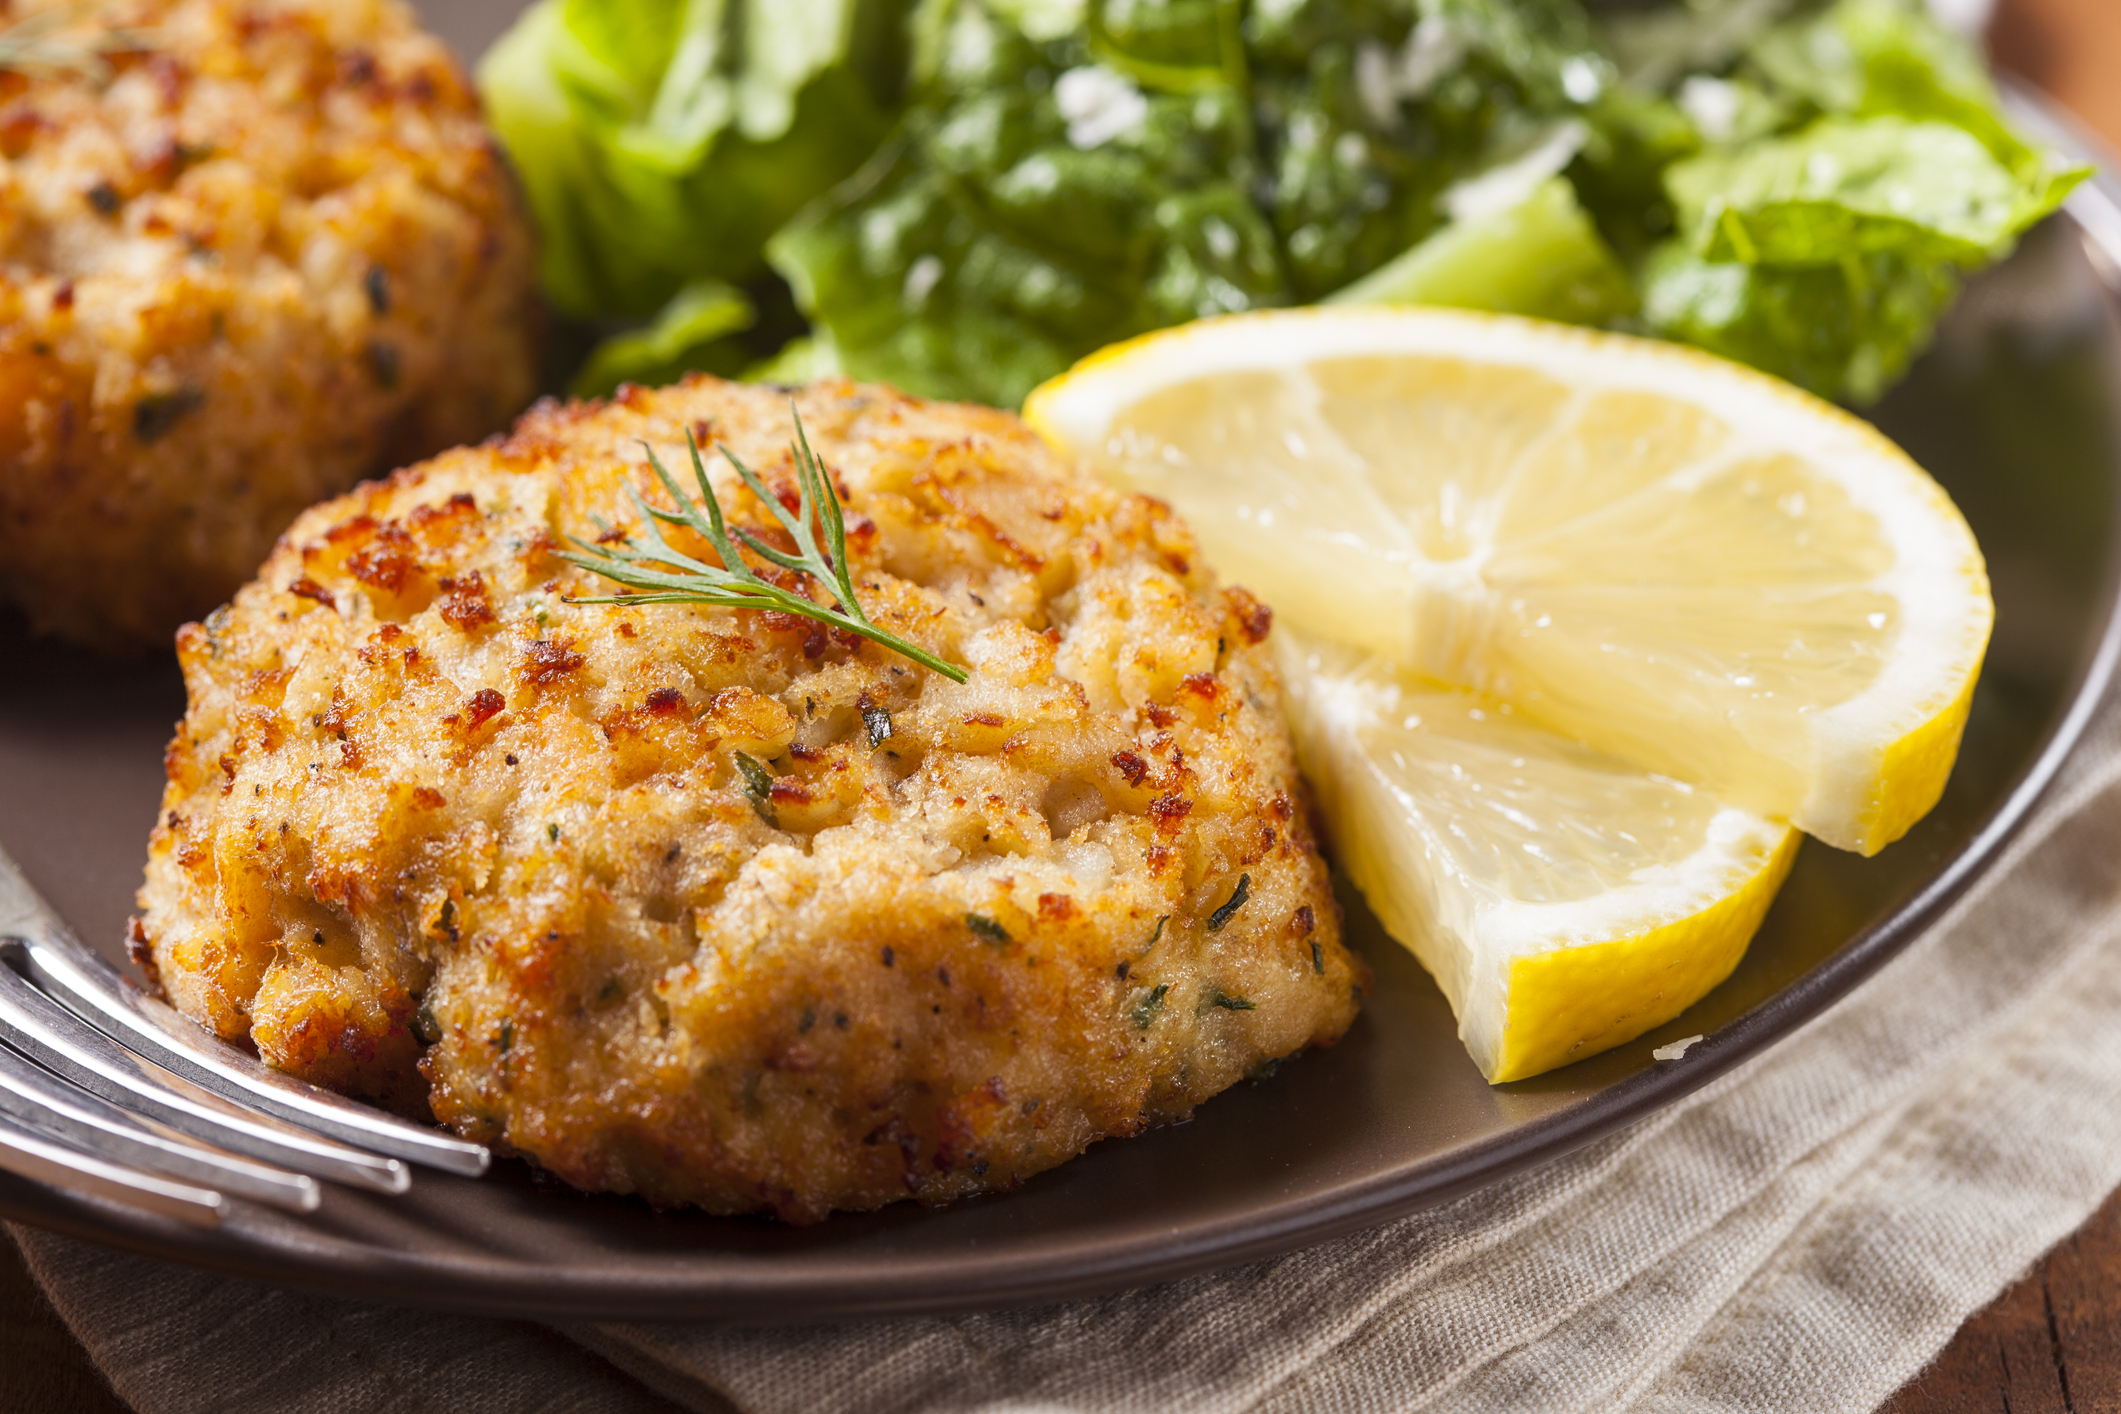 Plate of lump crab cakes and lemon.